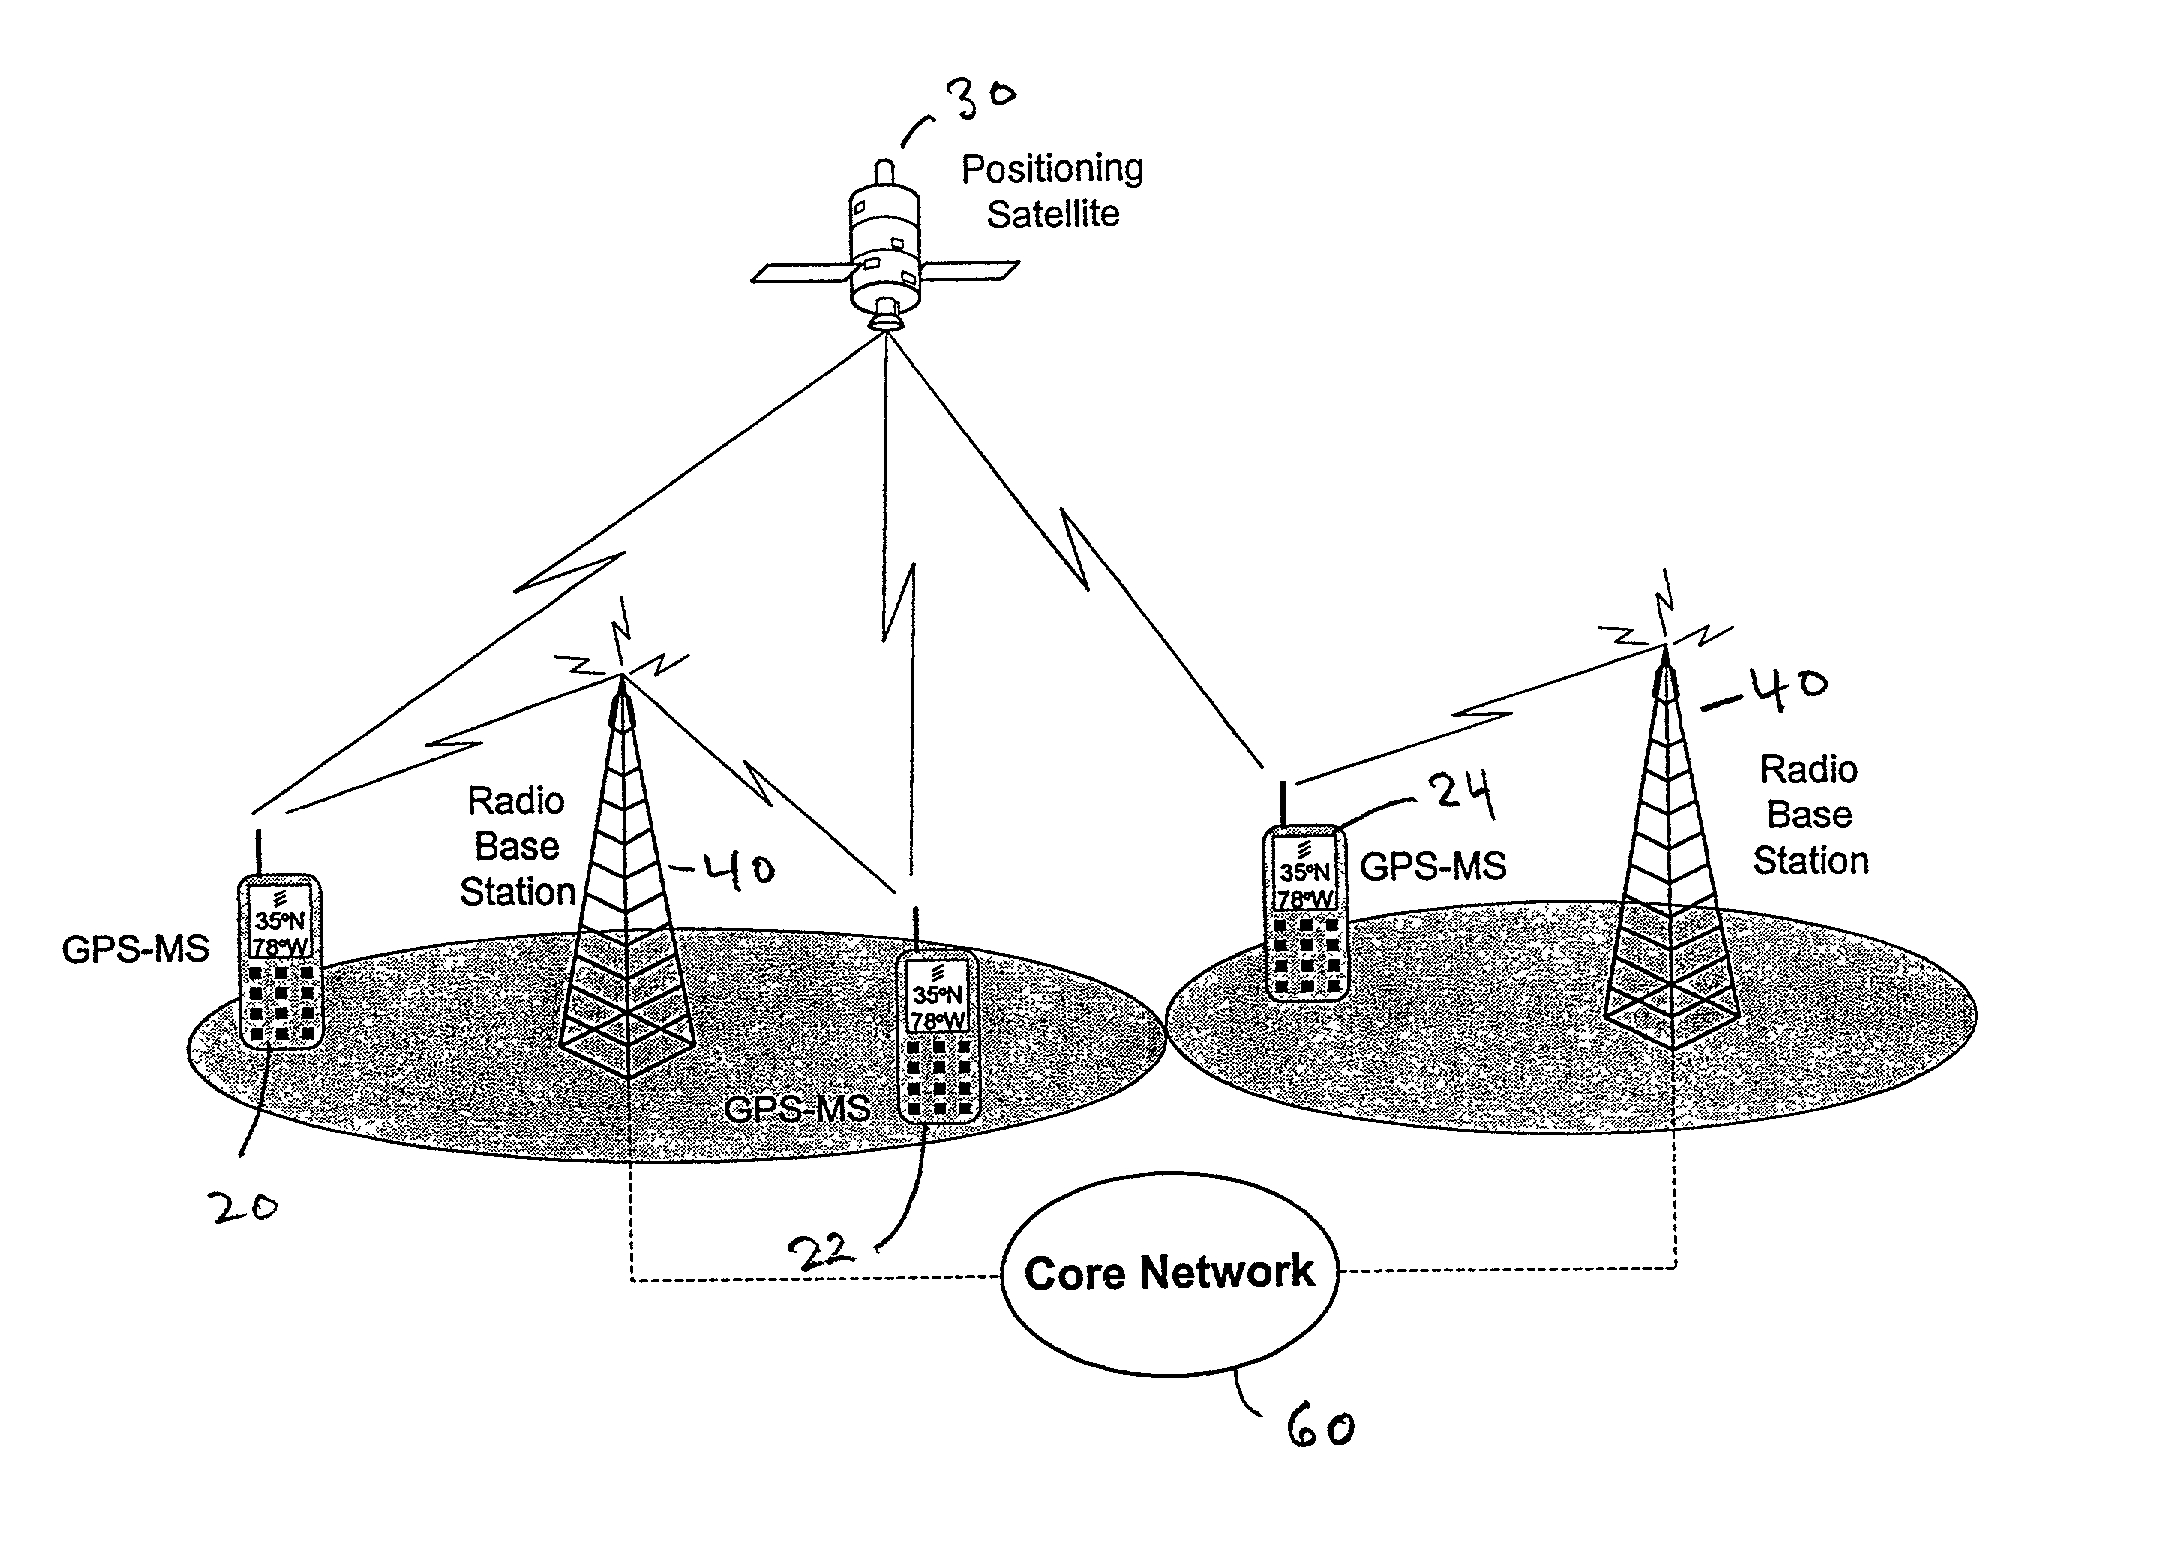 Peer to peer information exchange for mobile communications devices